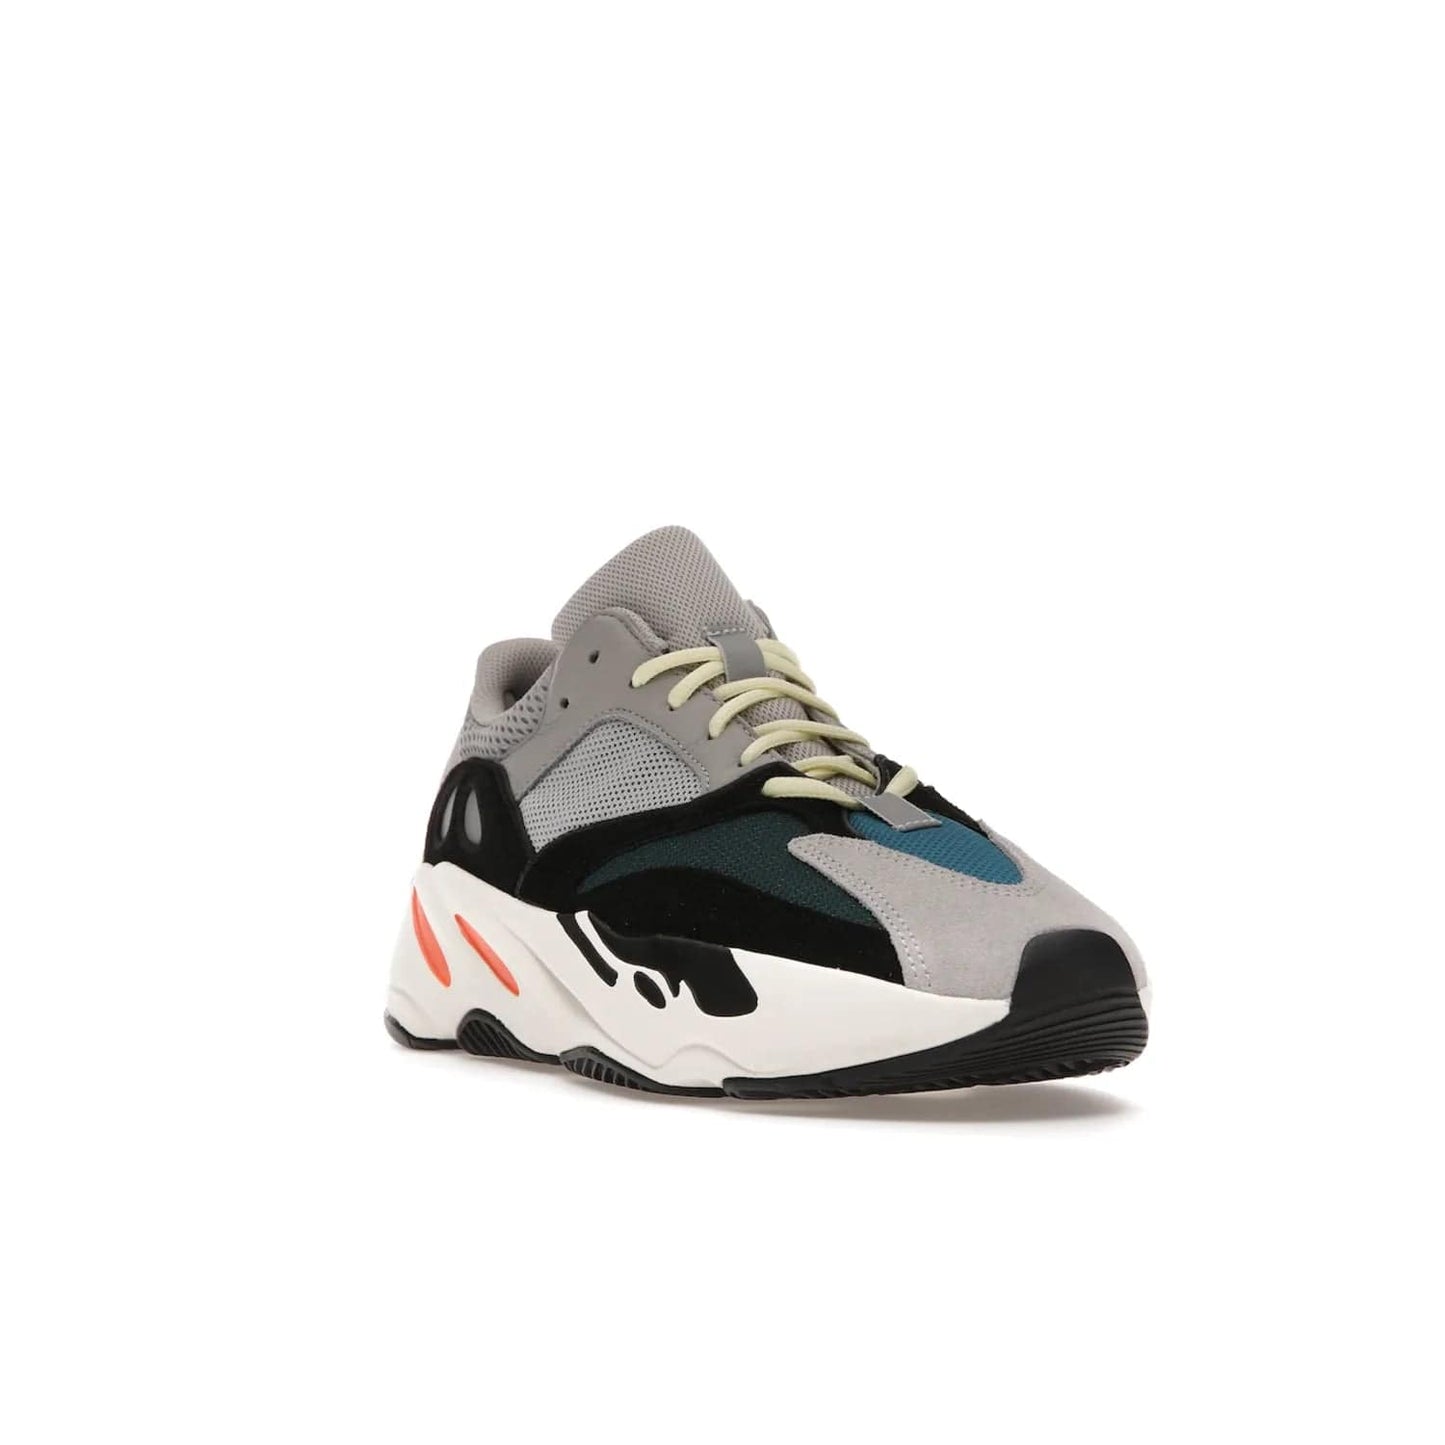 adidas Yeezy Boost 700 Wave Runner - Image 7 - Only at www.BallersClubKickz.com - Shop the iconic adidas Yeezy Boost 700 Wave Runner. Featuring grey mesh and leather upper, black suede overlays, teal mesh underlays, and signature Boost sole. Be bold & make a statement.